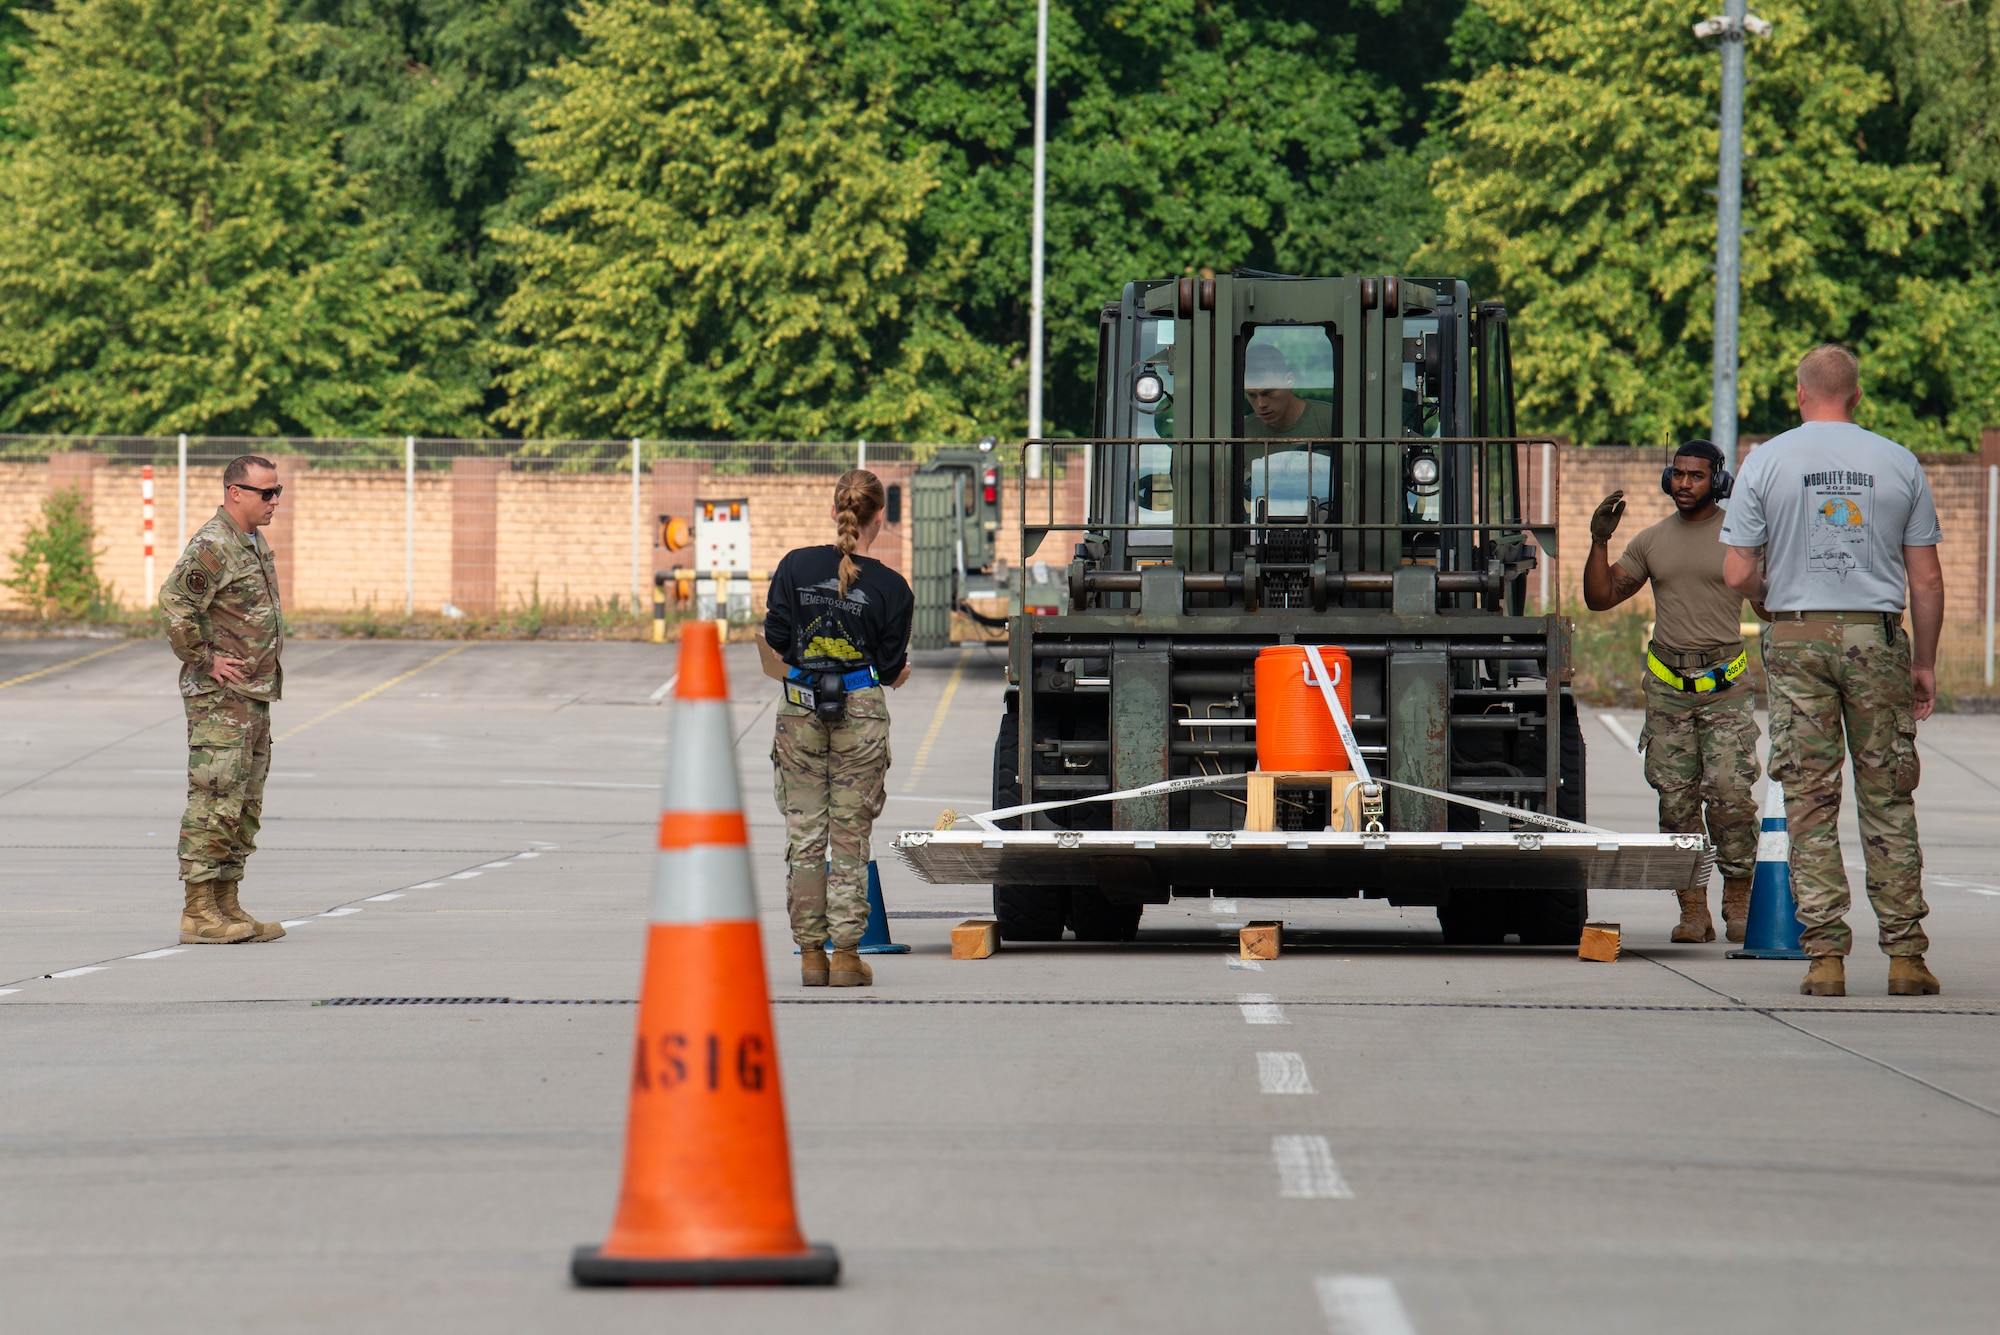 U.S. Air Force Airmen assigned to the 305th Aerial Port Squadron, Joint Base McGuire-Dix-Lakehurst, New Jersey, maneuver a forklift through a driving course during the 521st Air Mobility Operations Wing’s Mobility Rodeo at Ramstein Air Base, Germany, July 12, 2023.